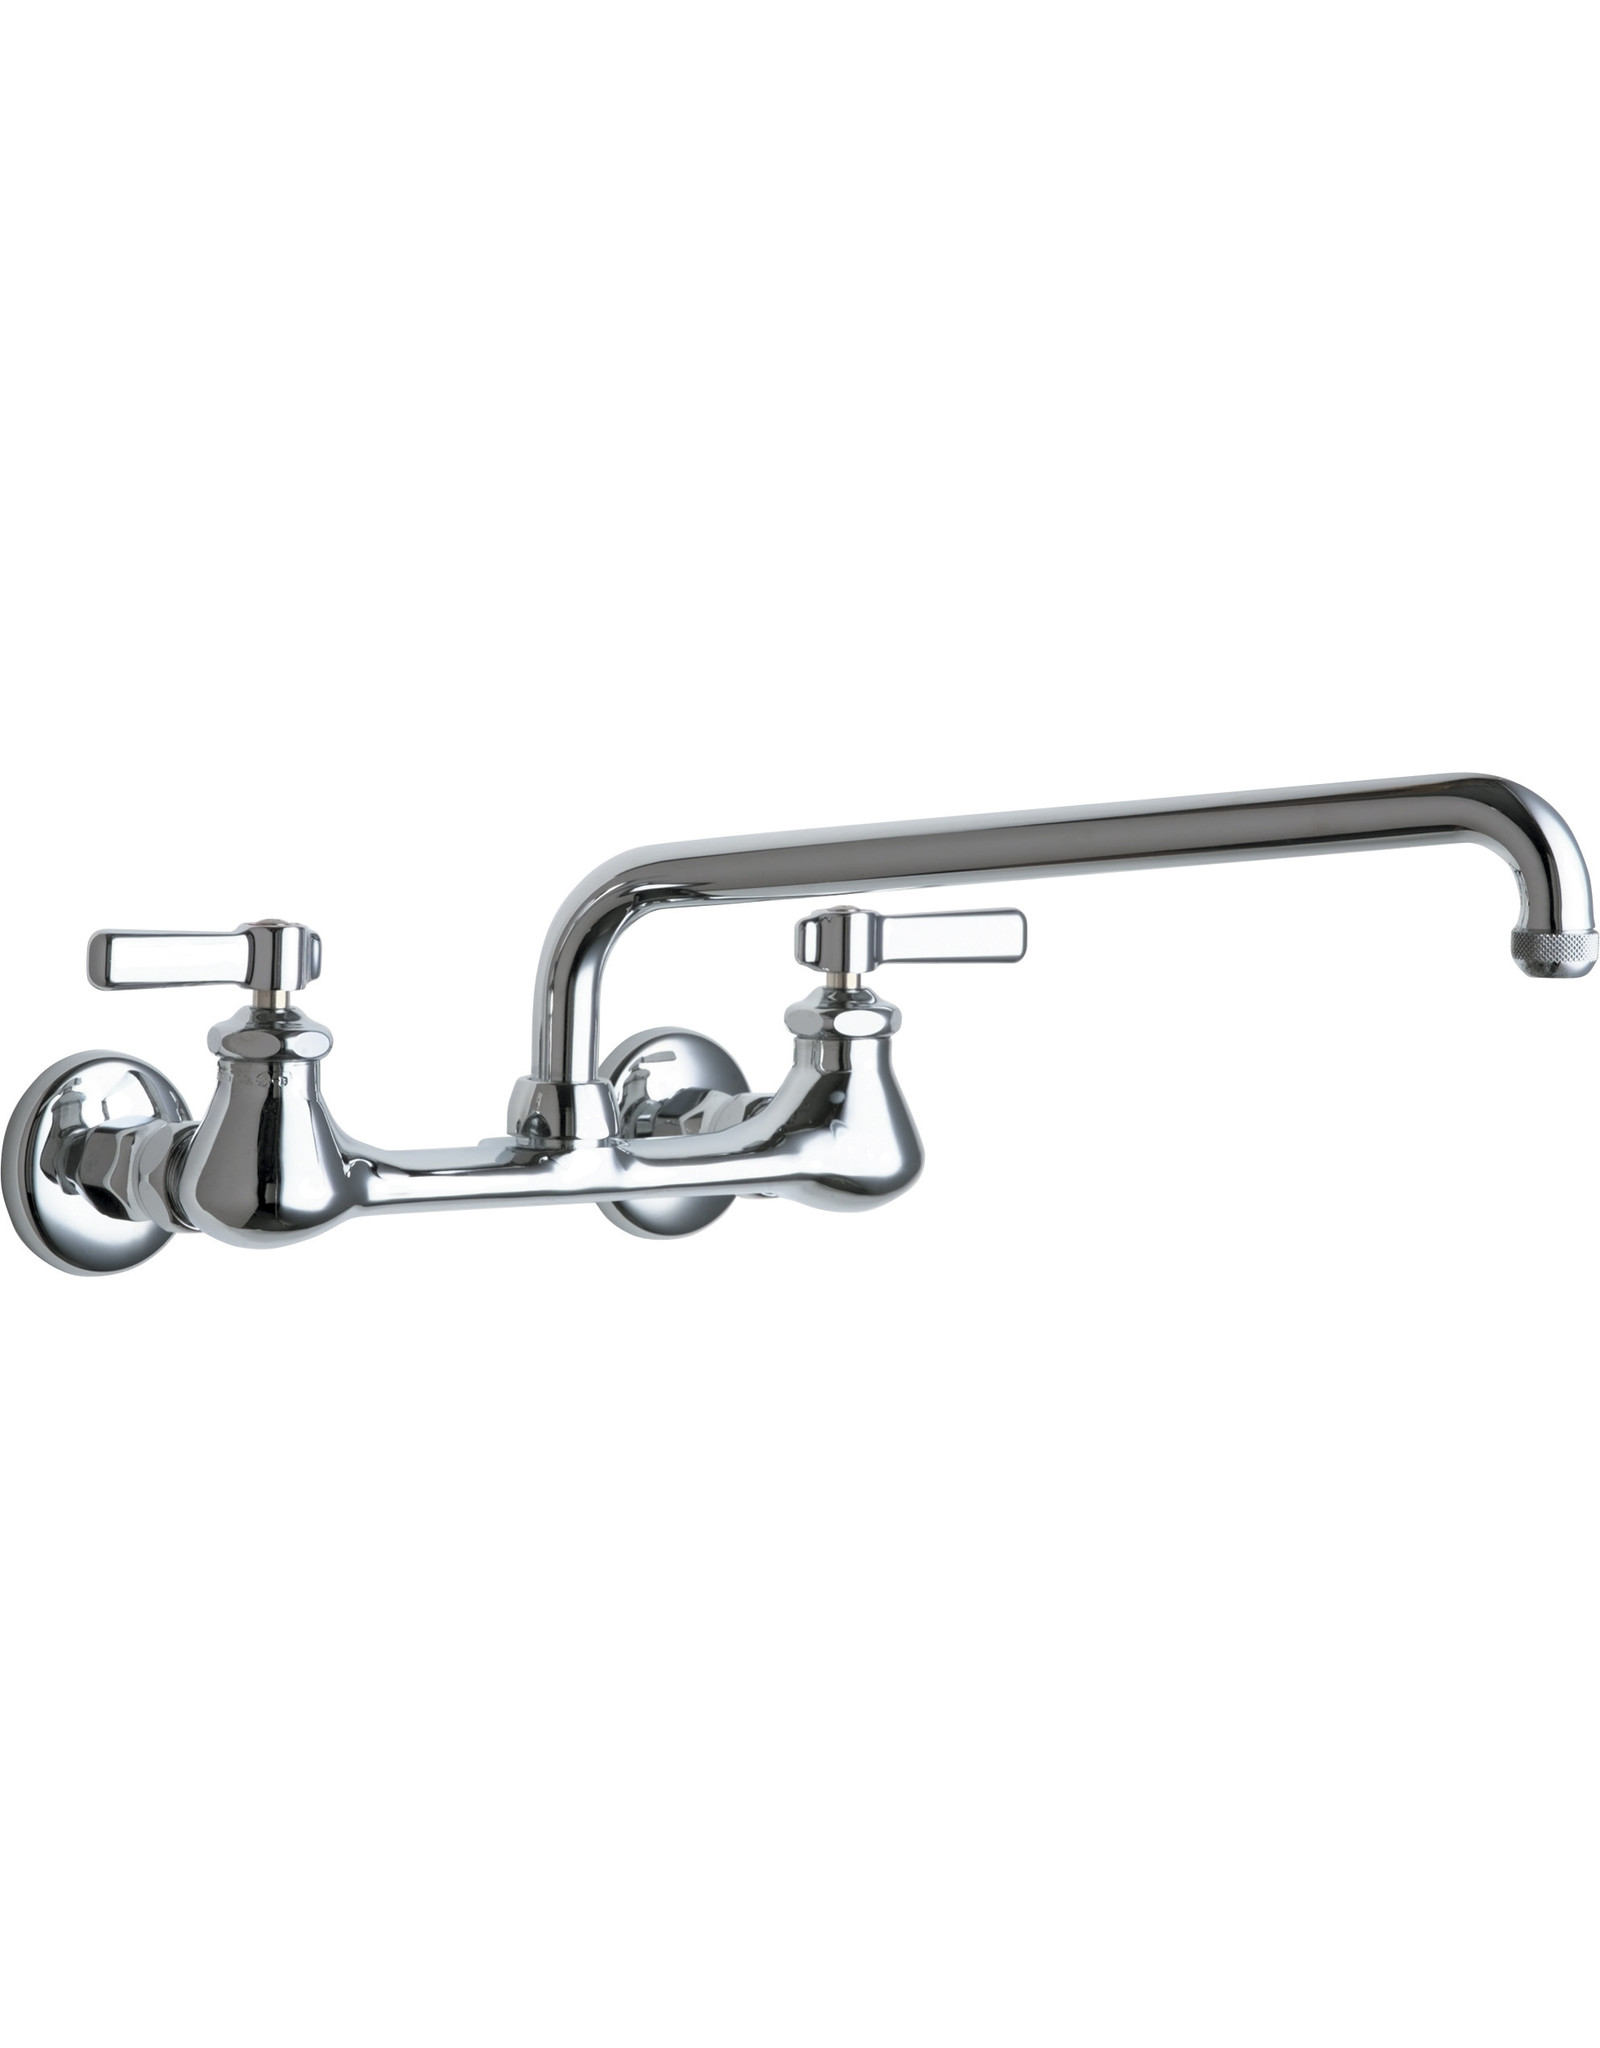 CHICAGO FAUCETS Chicago Wall Mount Faucet 12" Swing Spout